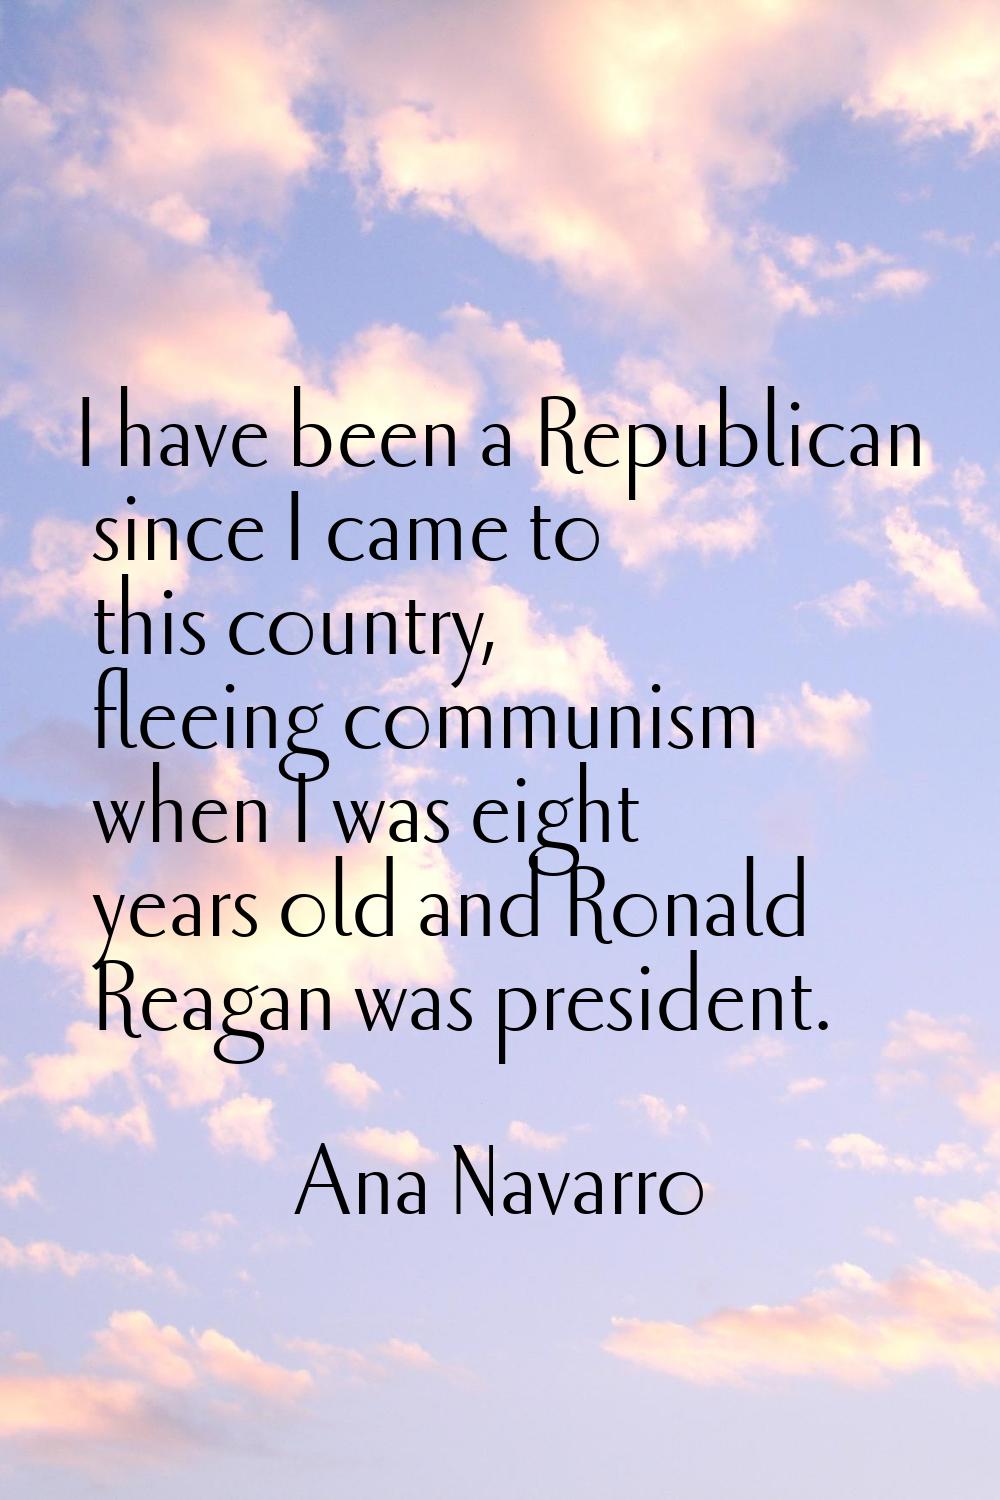 I have been a Republican since I came to this country, fleeing communism when I was eight years old